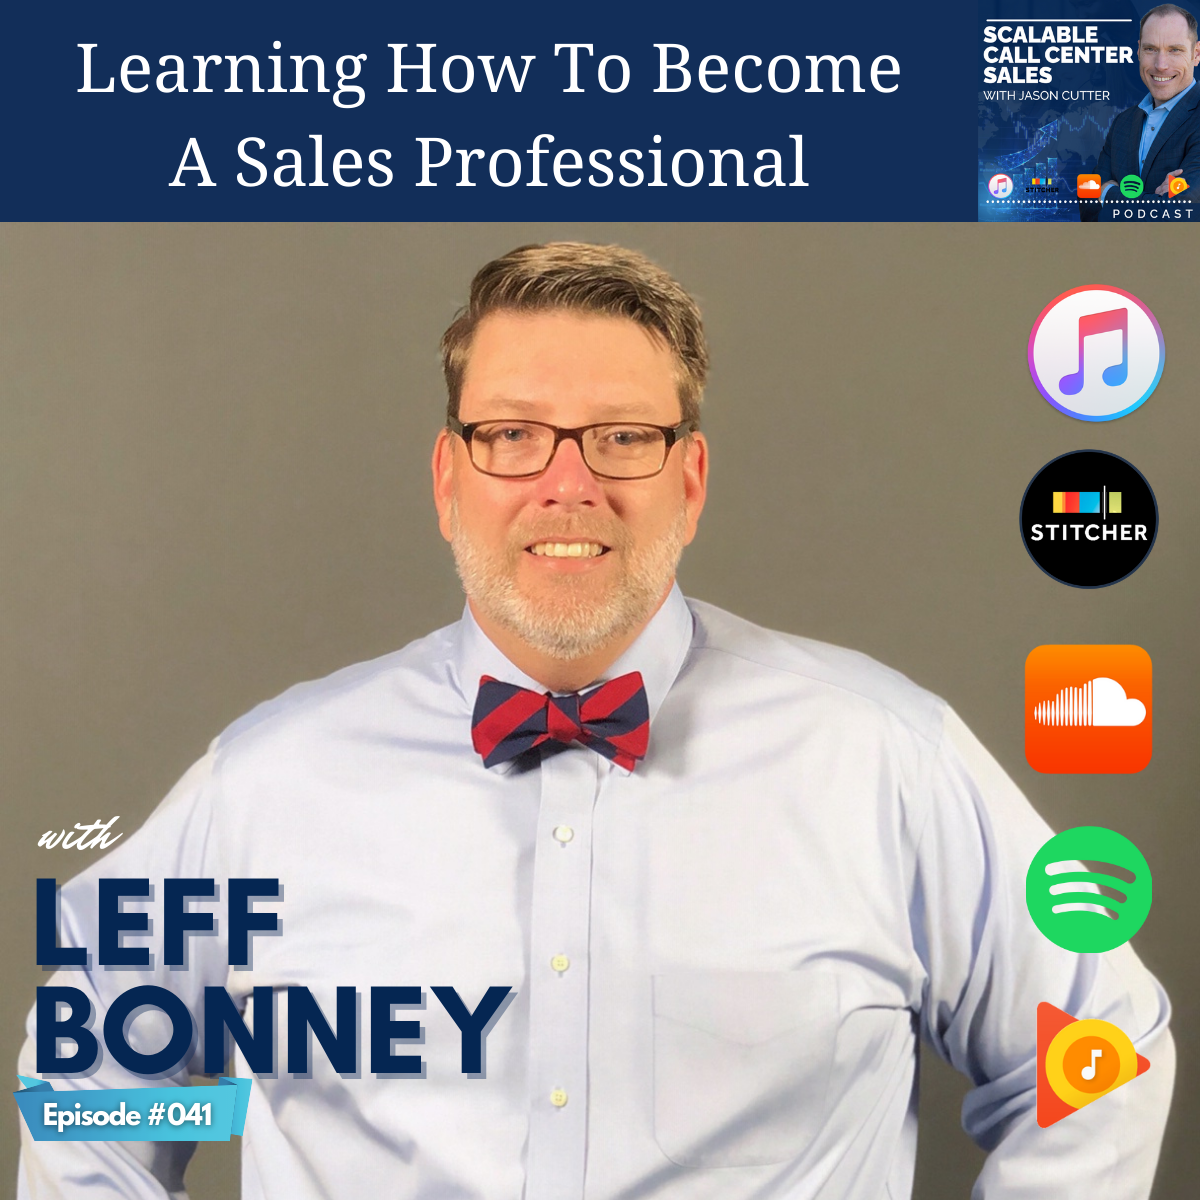 [041] Learning How To Become A Sales Professional, with Leff Bonney from Florida State University